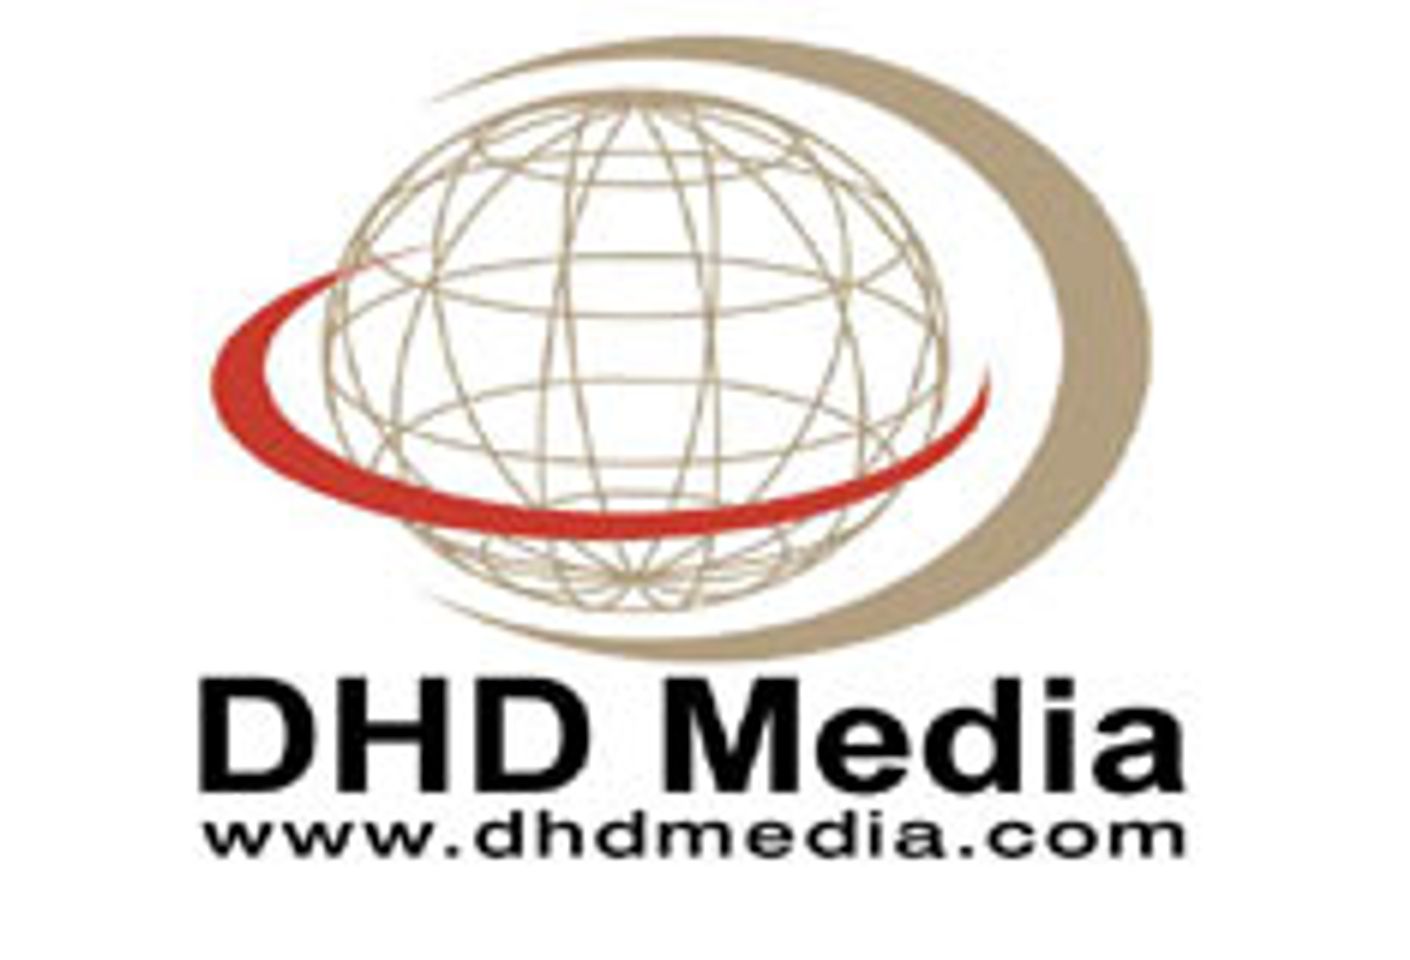 DHD Media Launches Streaming And DRM Services